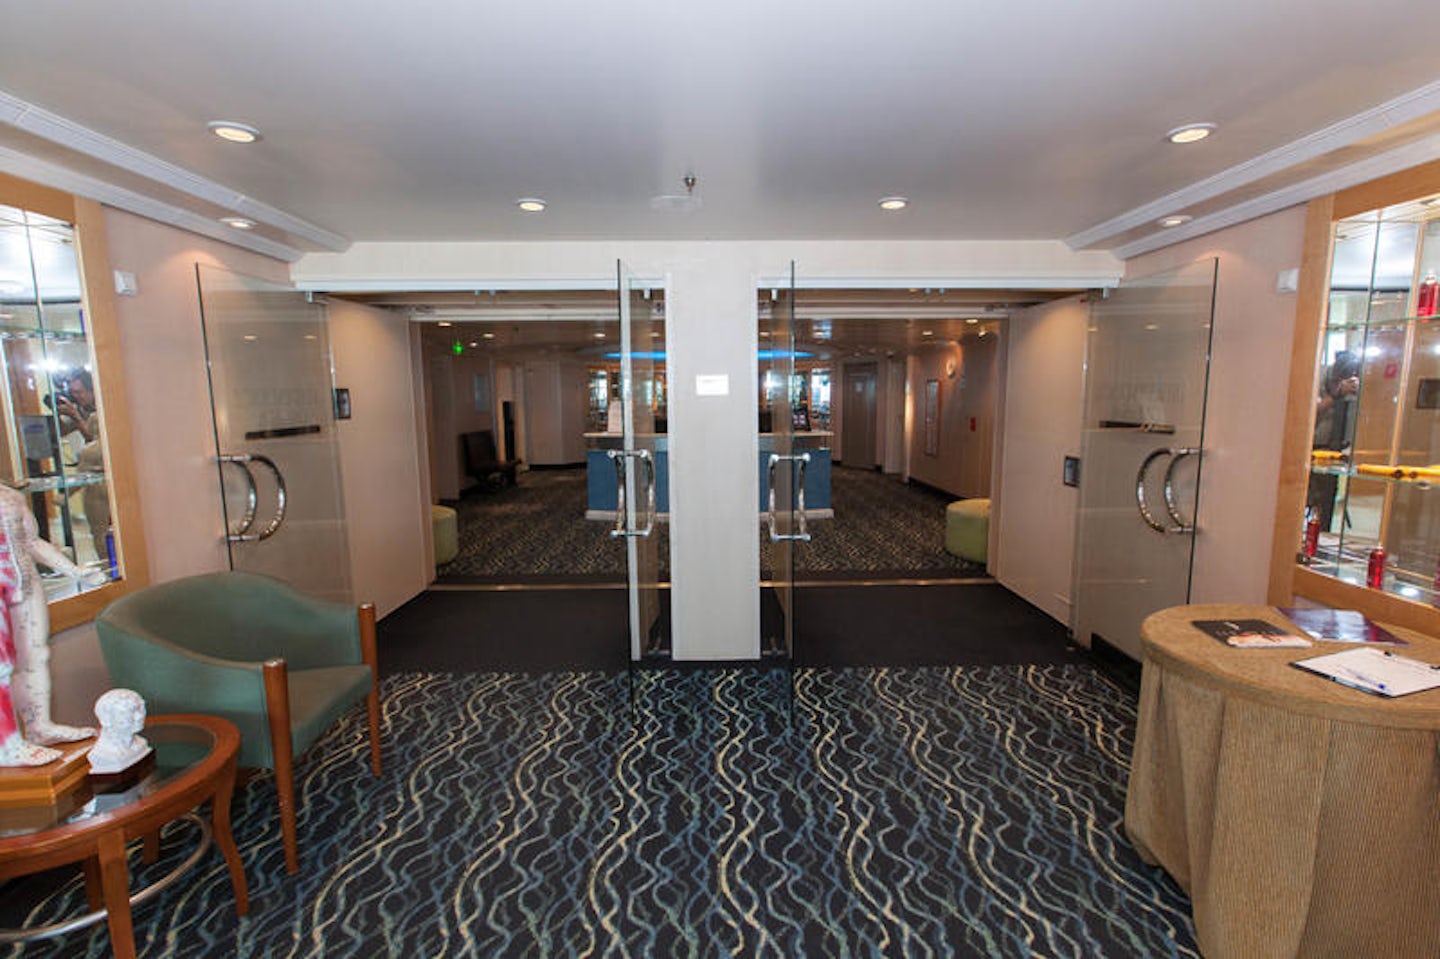 Vitality at Sea Spa on Independence of the Seas